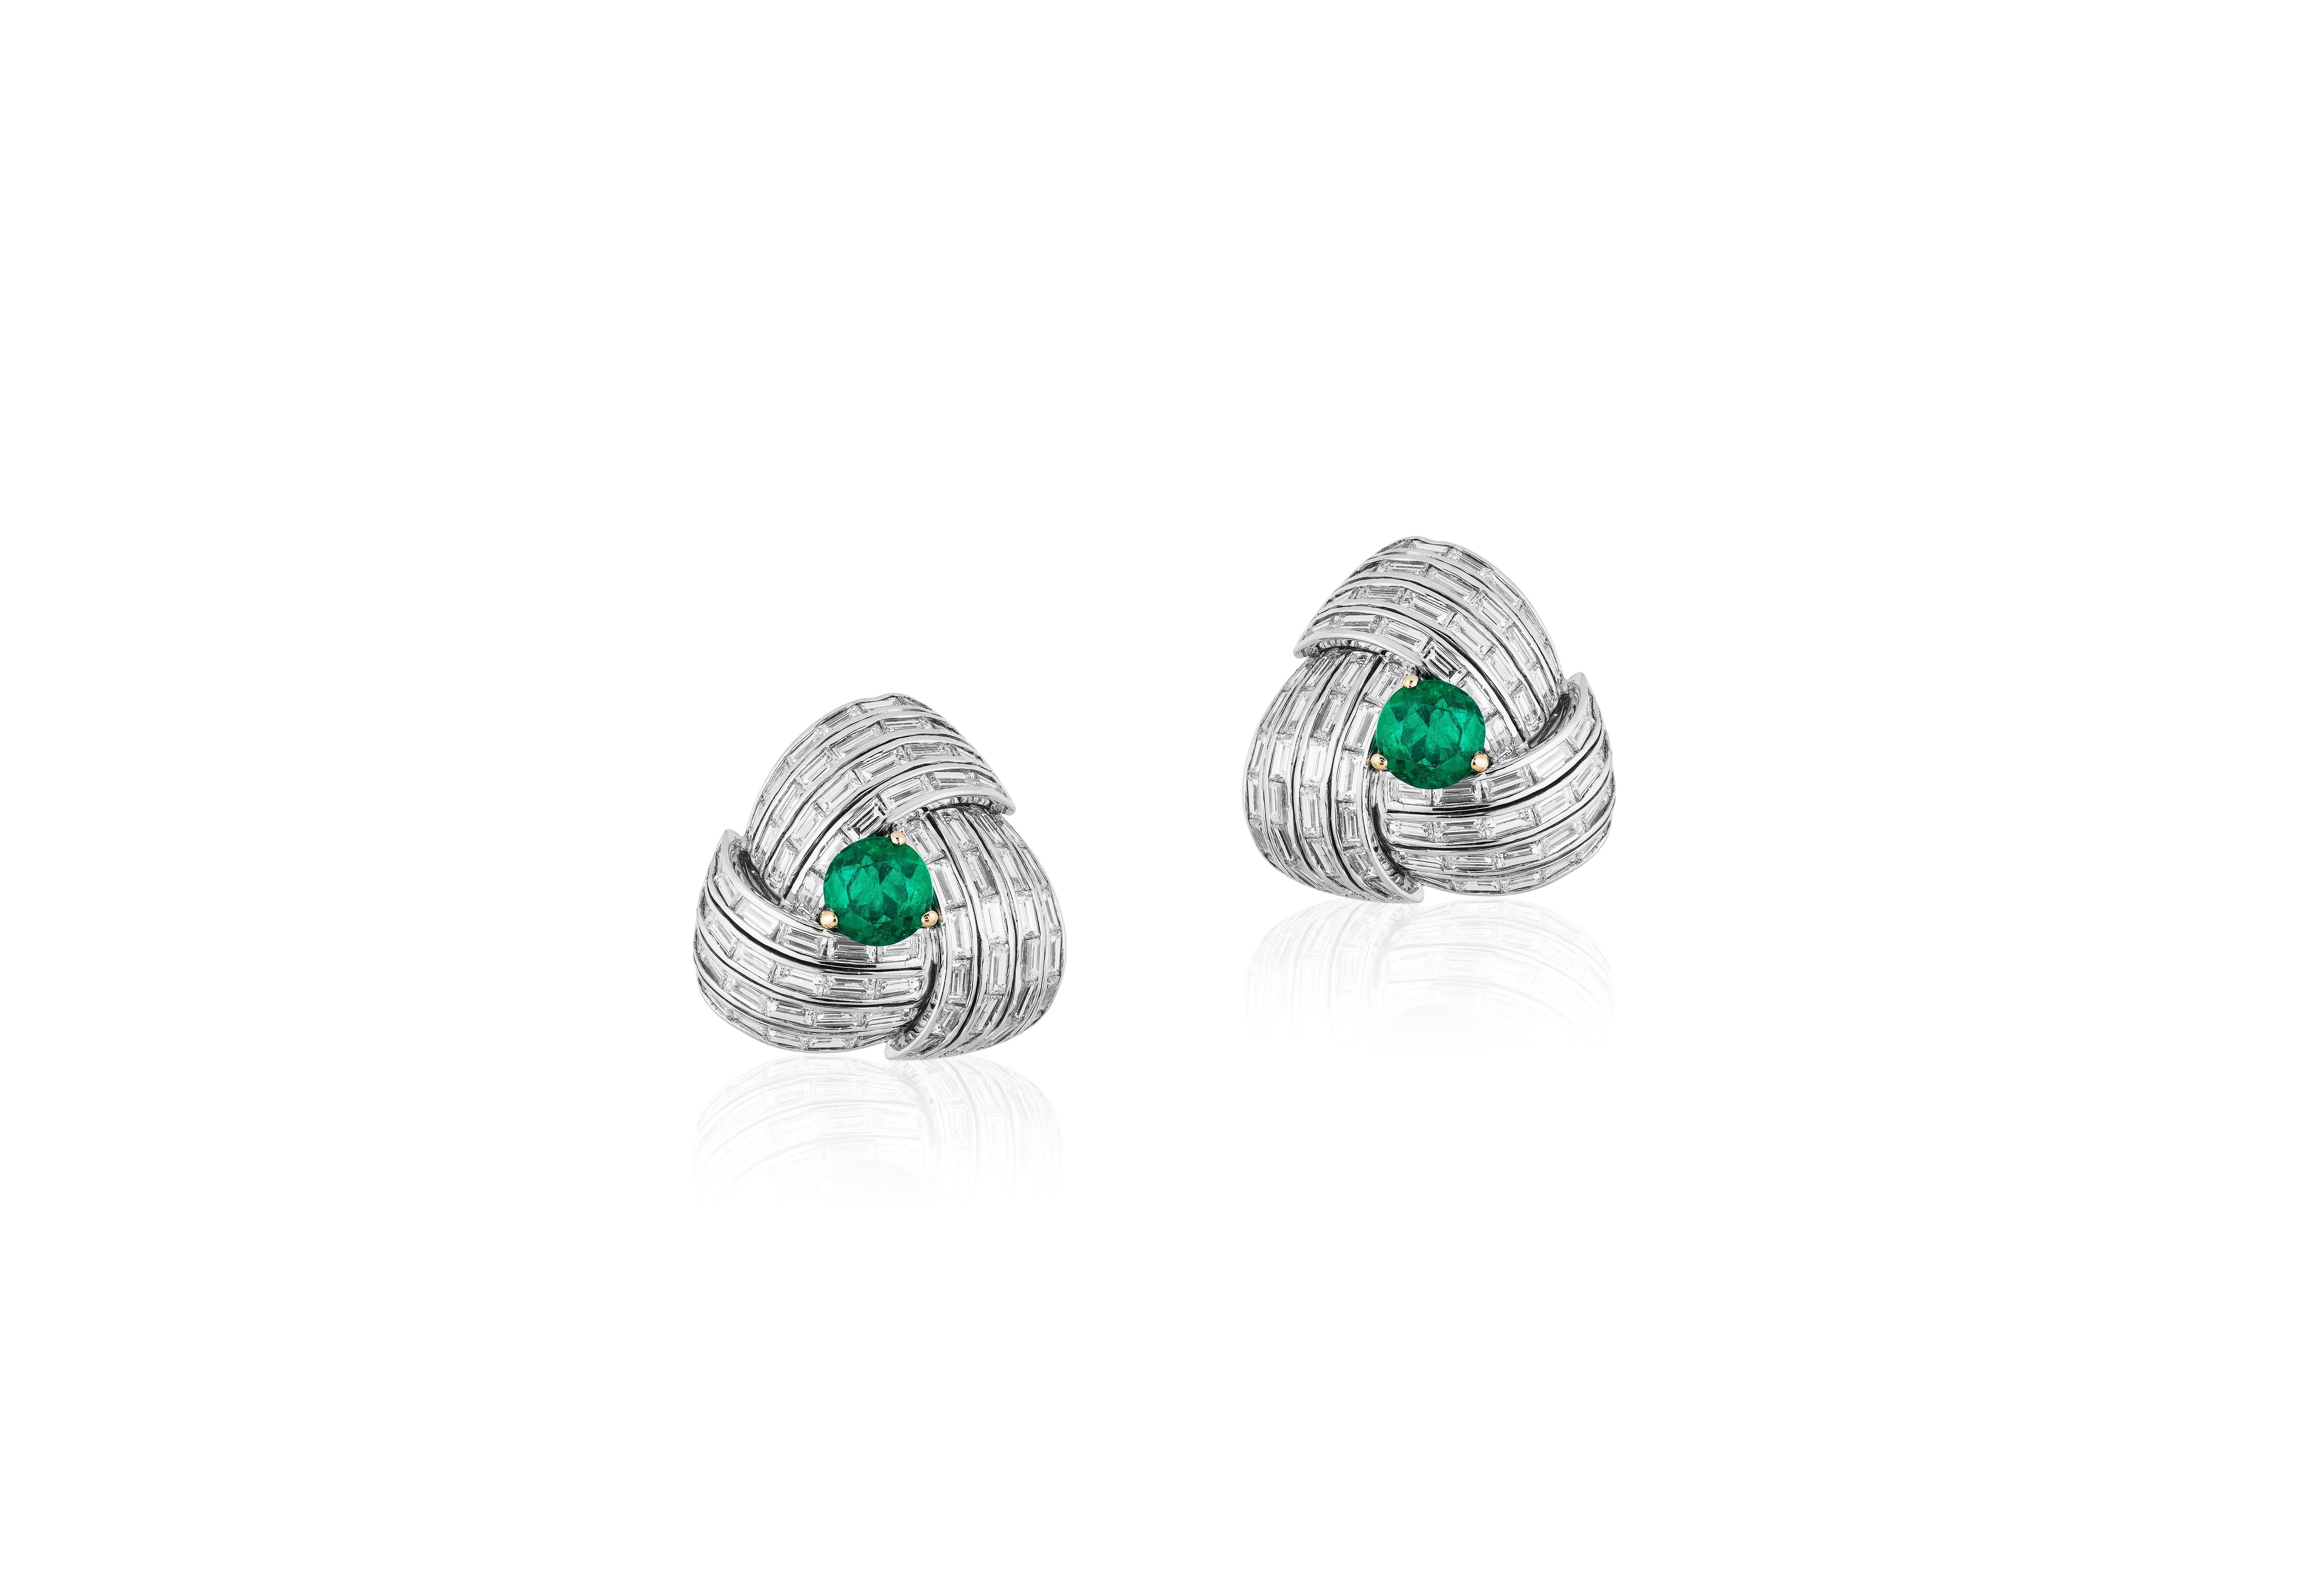  Emerald & Diamond Baguette Stud Earrings in Platinum, from G-One' Collection

Gemstone Weight: 2.35 Carats

Diamond: G-H / VS, Approx Wt: 7.0 Carats